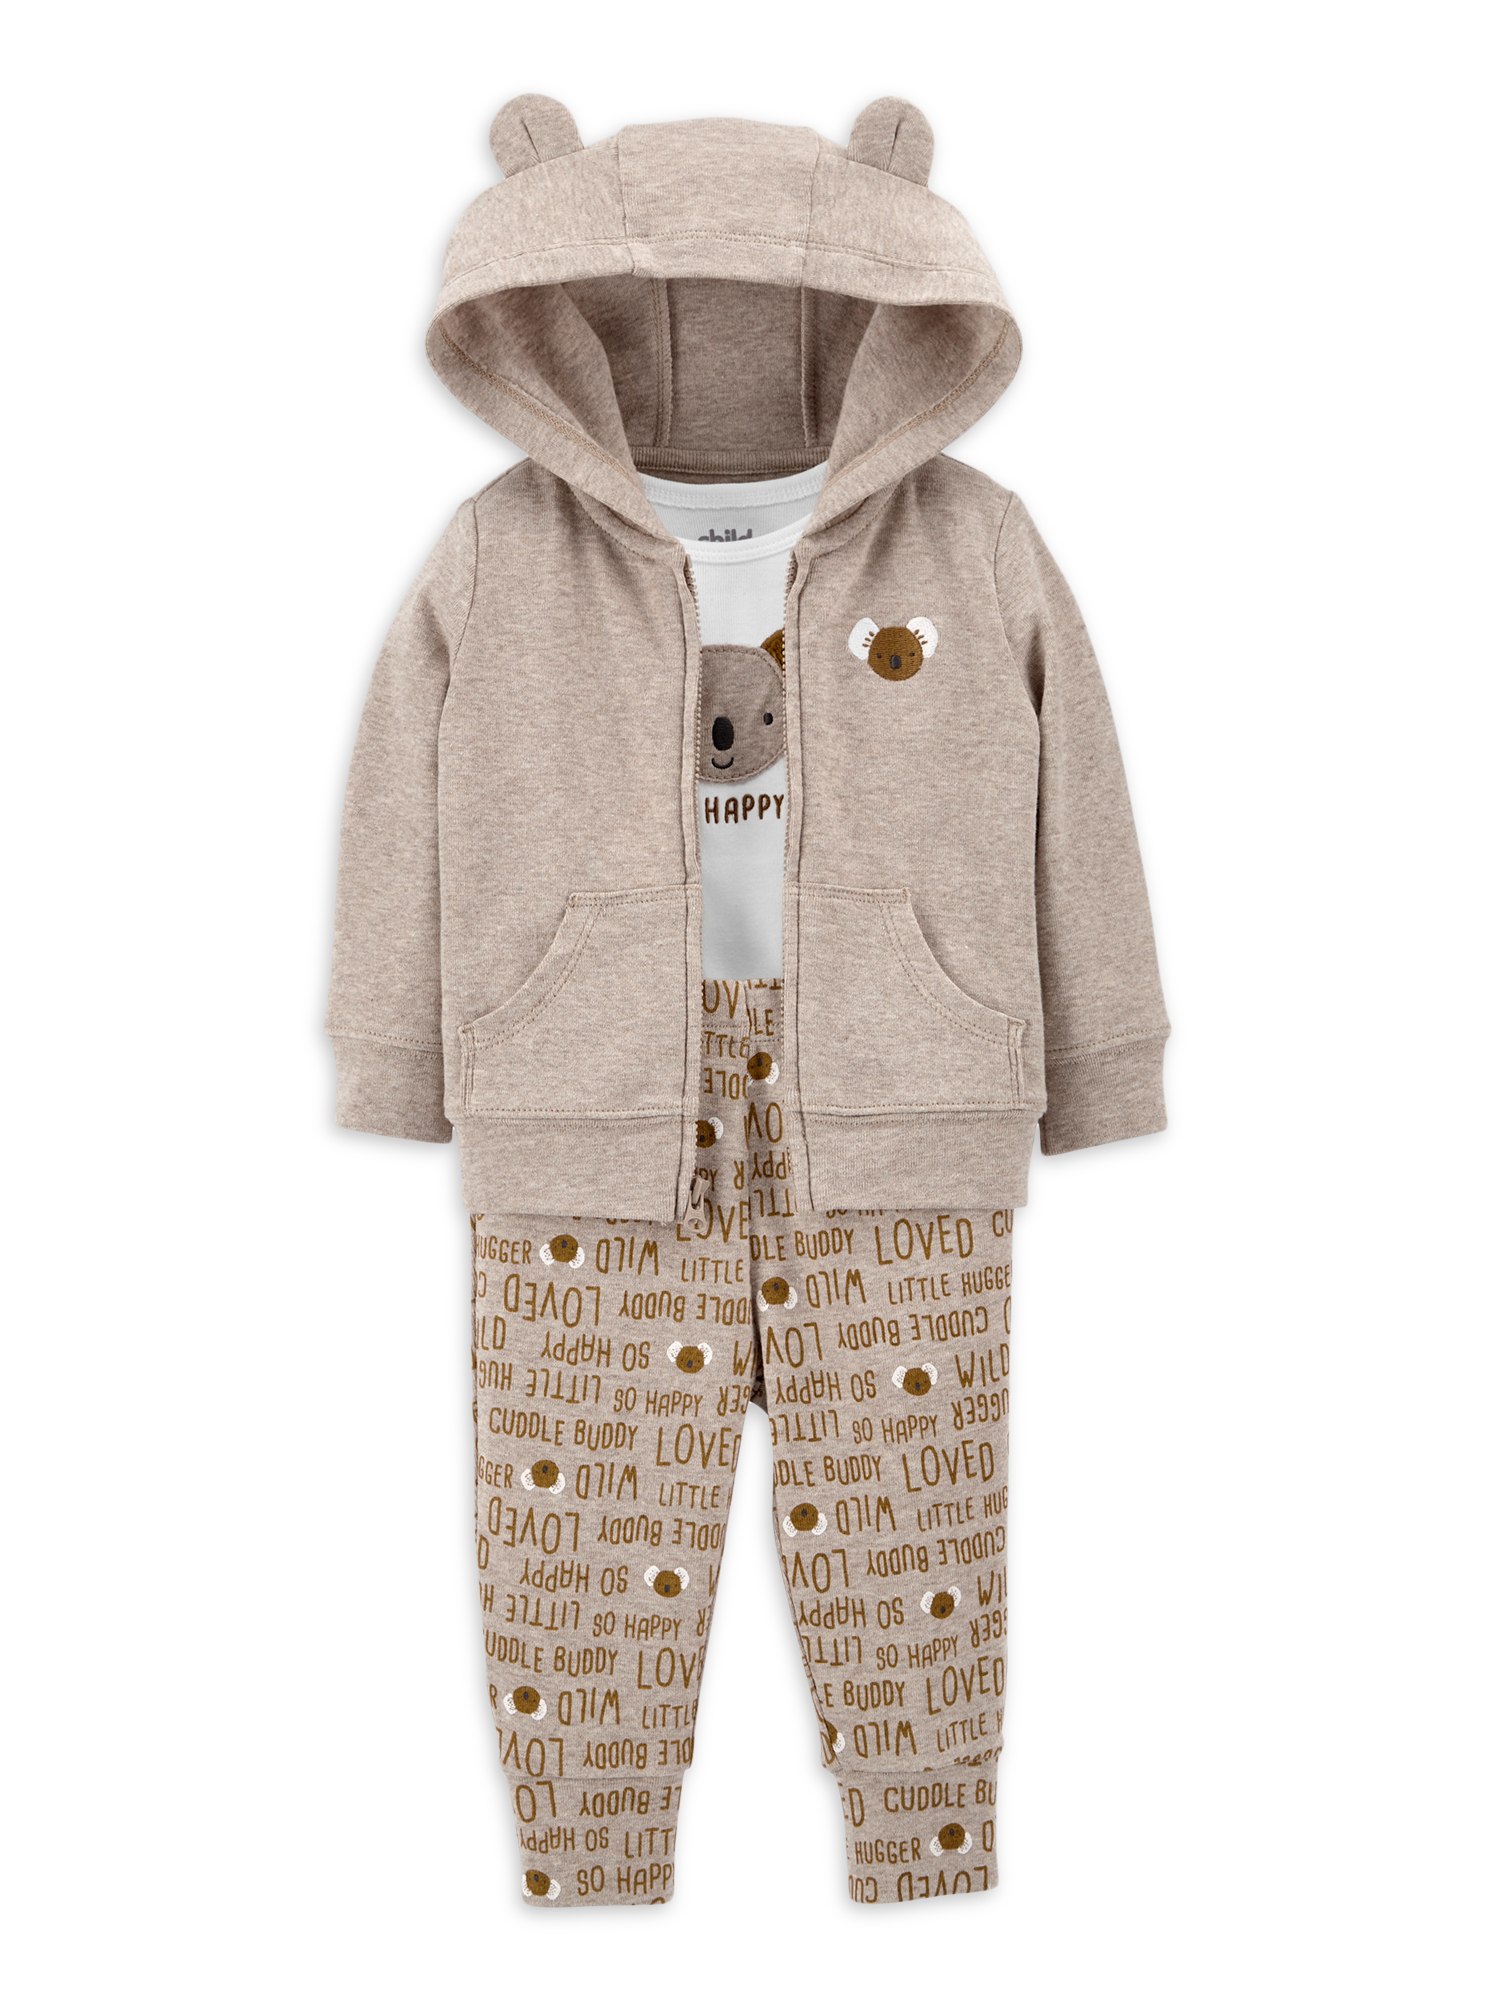 Carter's Child of Mine Baby Boy Outfit Jacket, Short Sleeve Bodysuit & Pants, 3-Piece, Preemie-24 Months - image 2 of 4